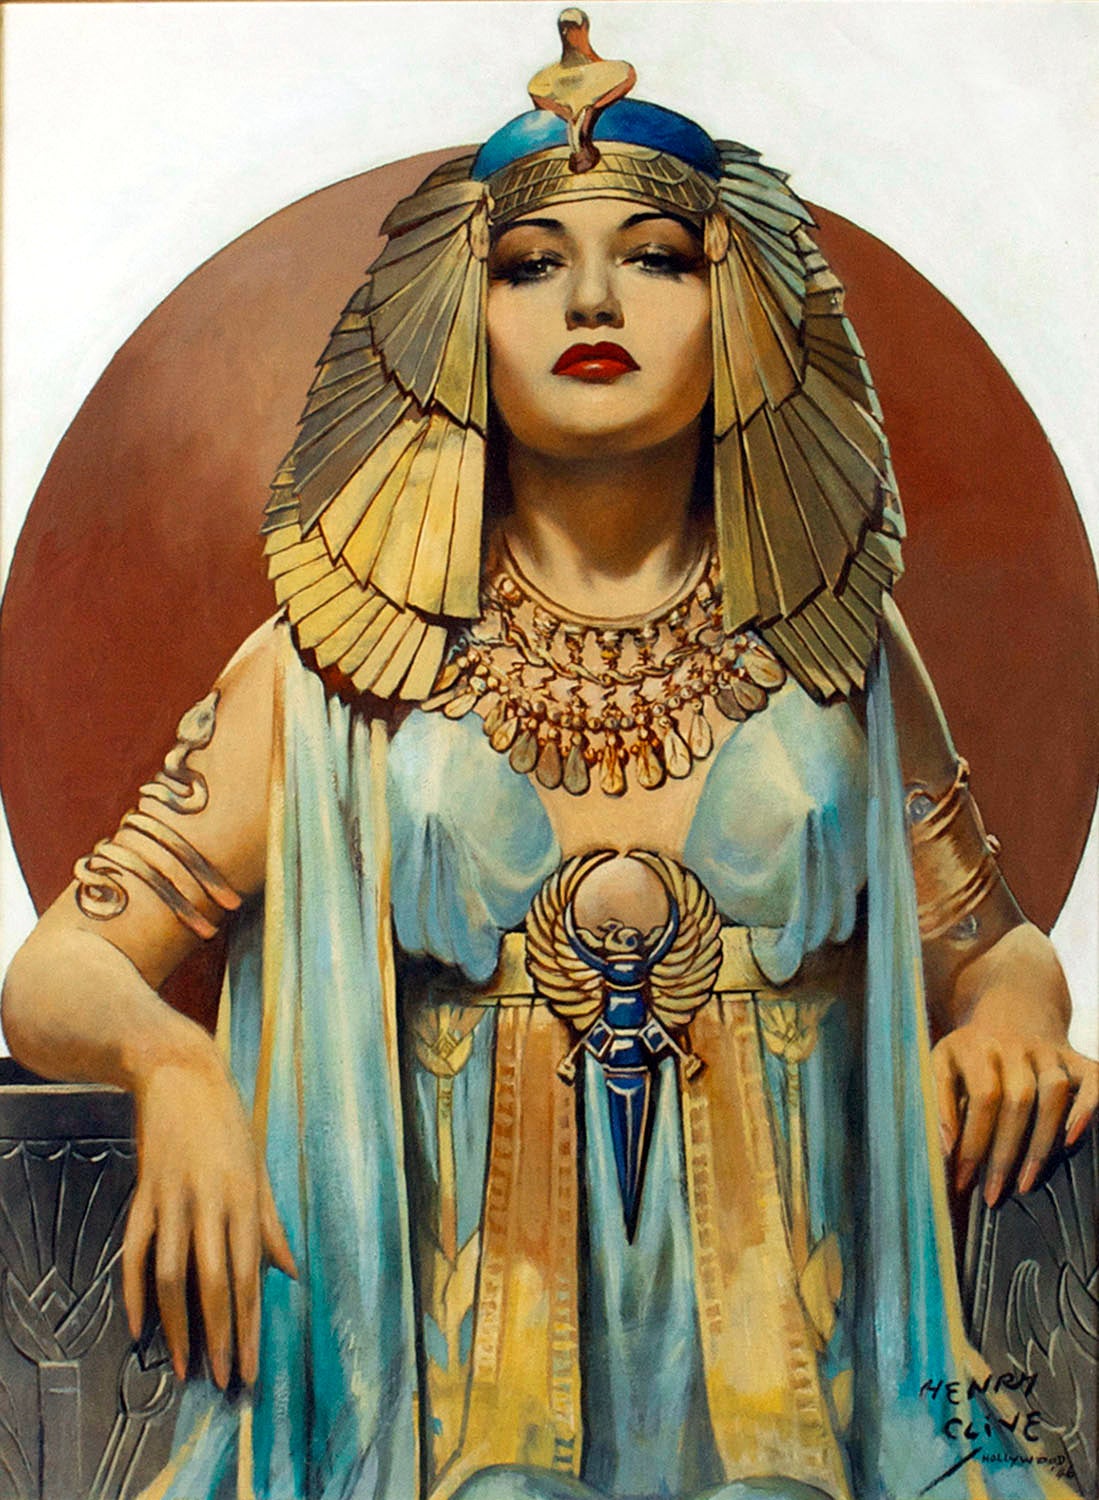 Henry Clive - Cleopatra at 1stDibs